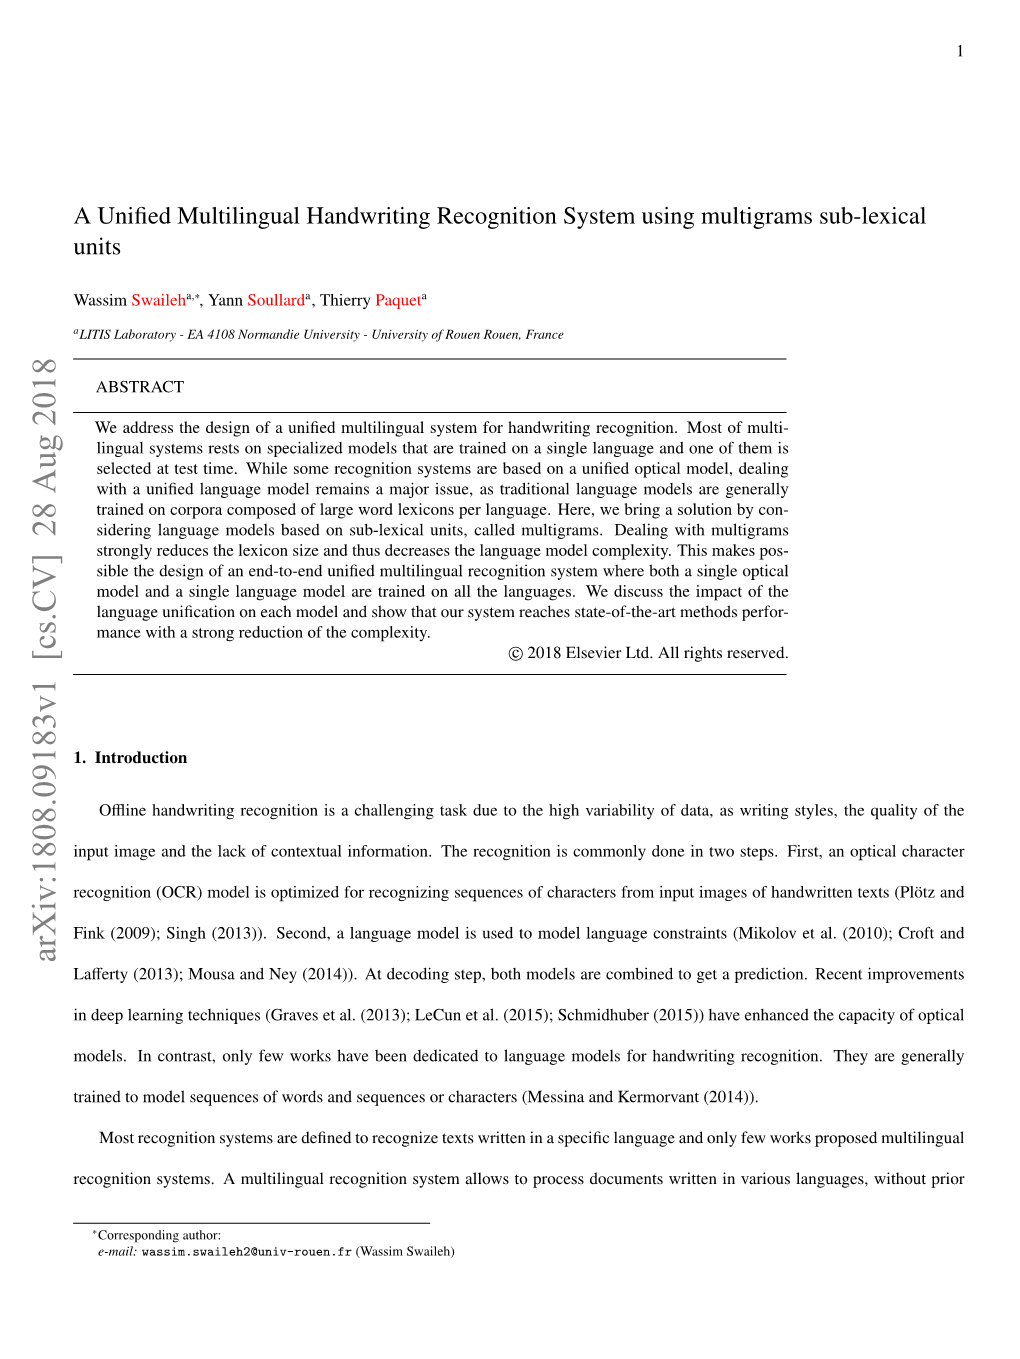 A Unified Multilingual Handwriting Recognition System Using